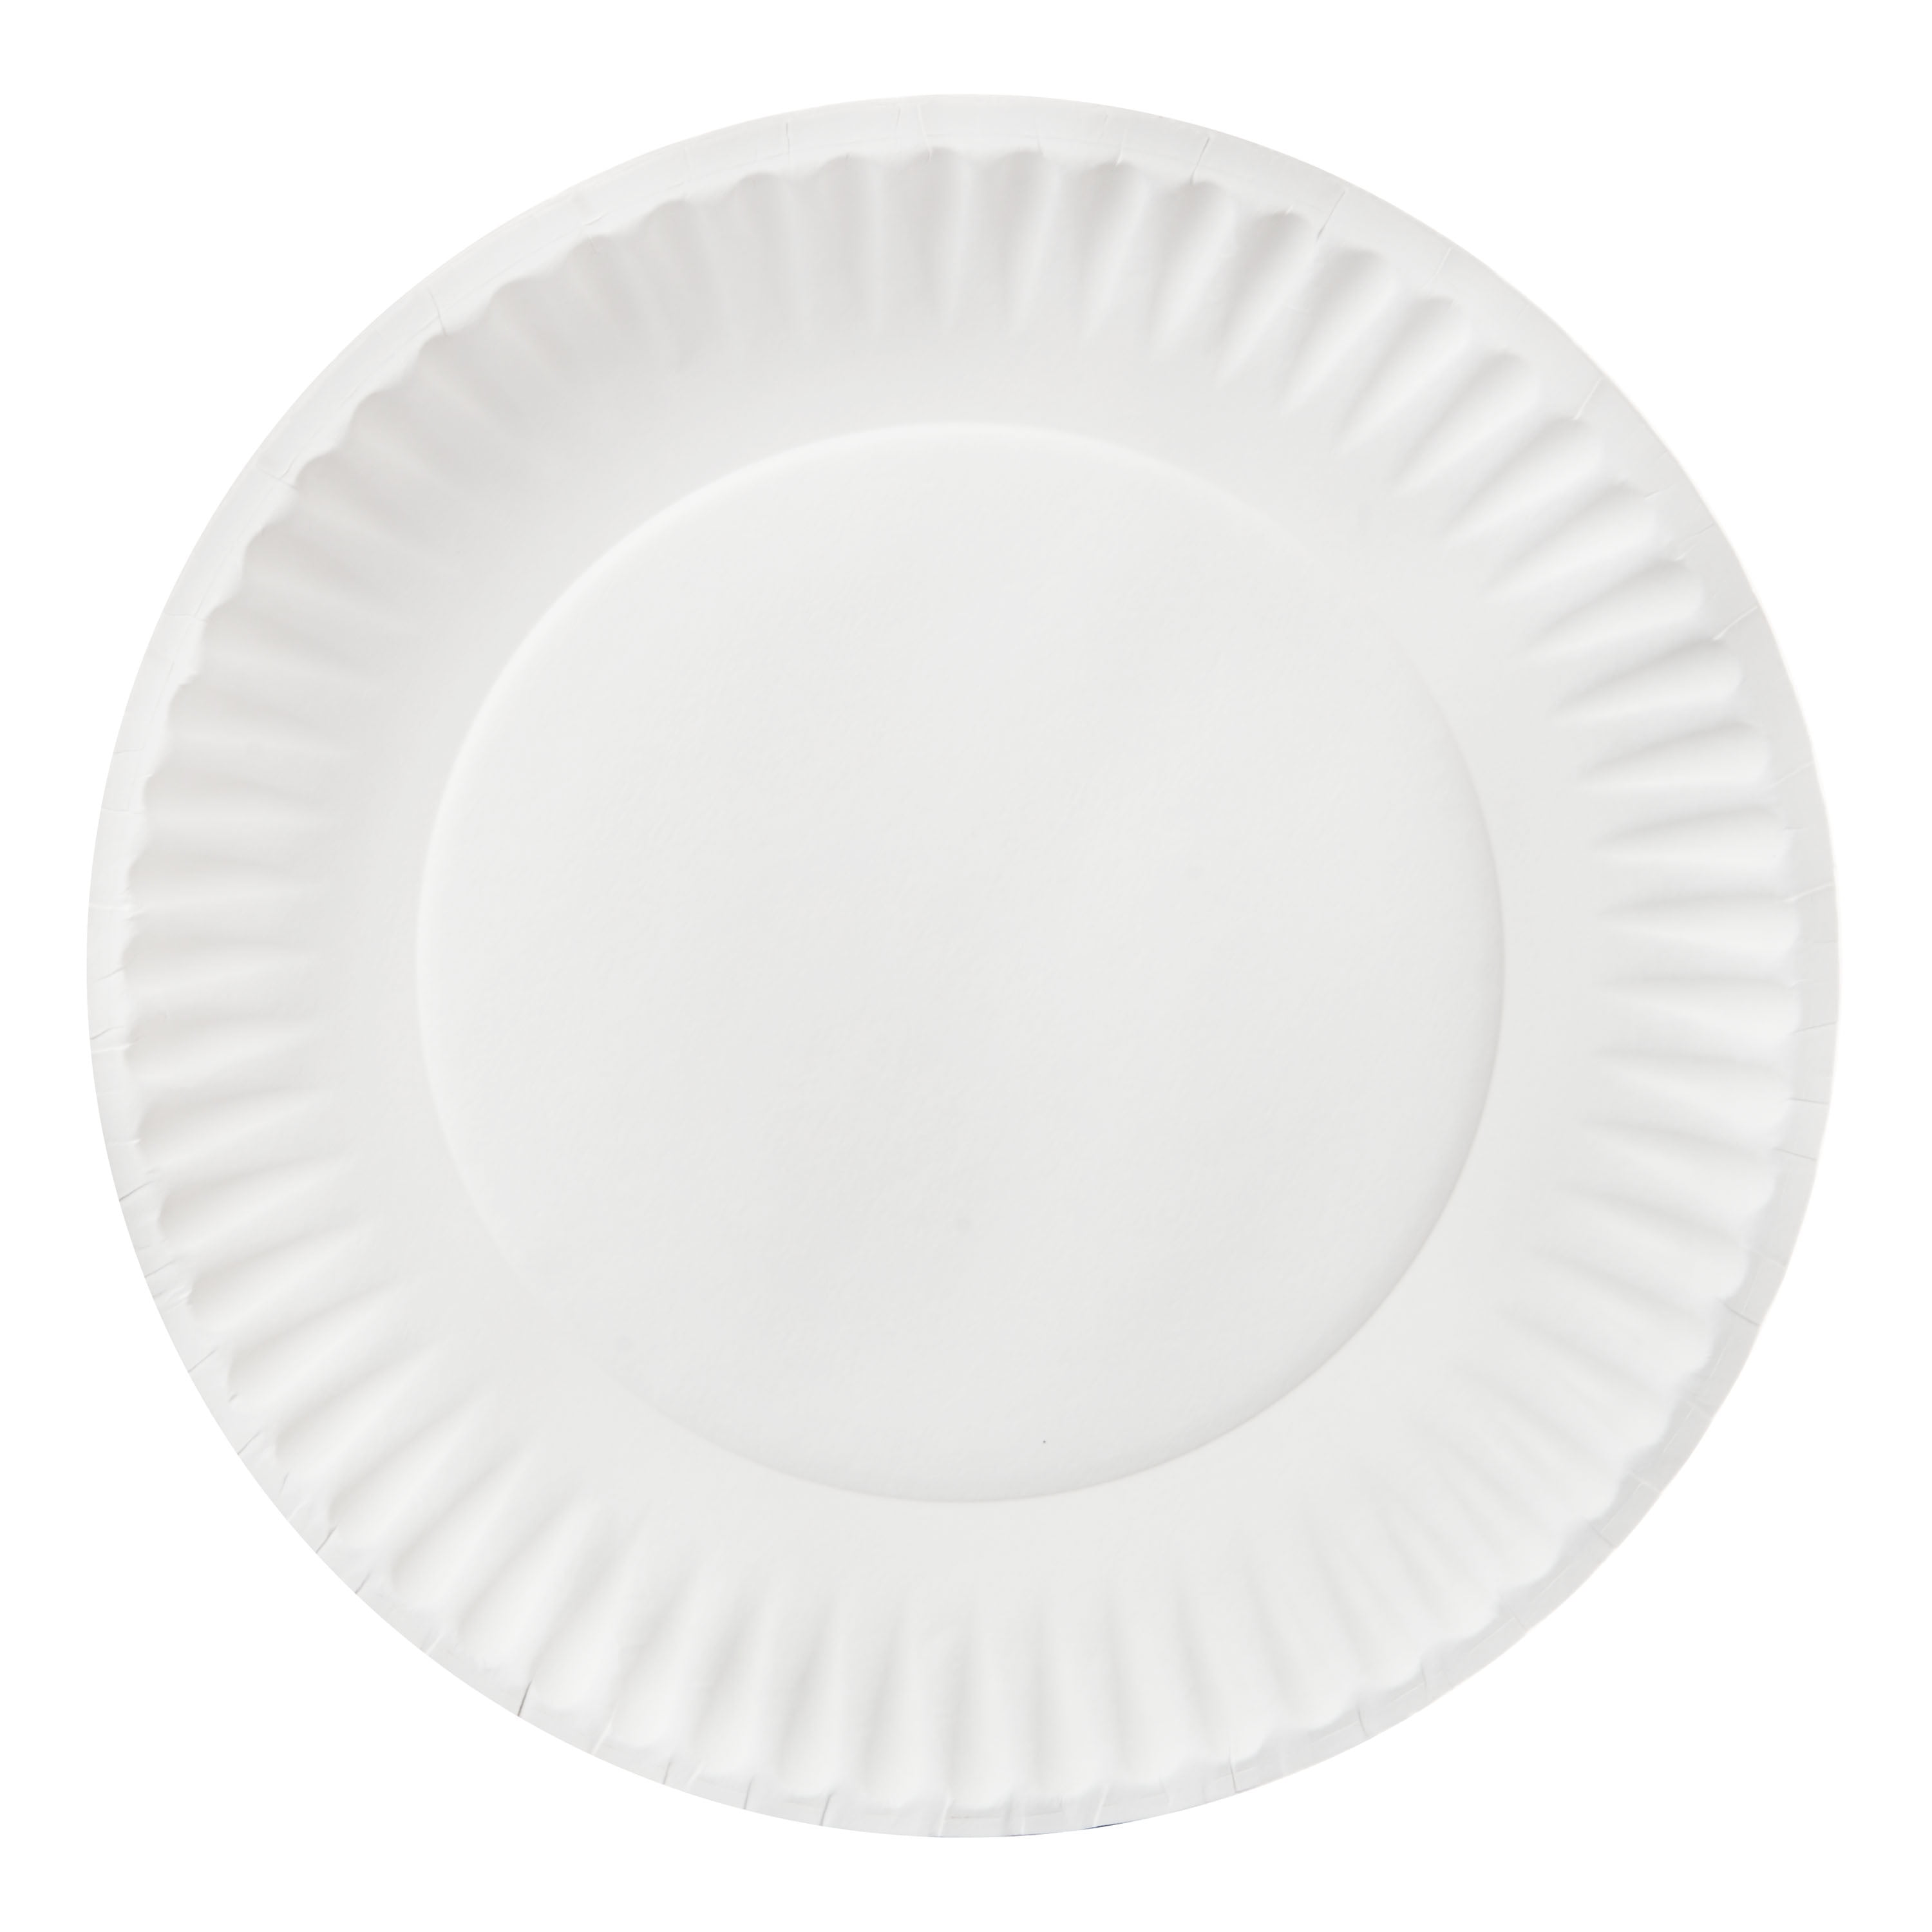 300 PACK] White Disposable Paper Plates 6 Inch by EcoQuality - Perfect for  Parties, BBQ, Catering, Office, Event's, Pizza, Restaurants, Recyclable,  Compostable and Microwave Safe 